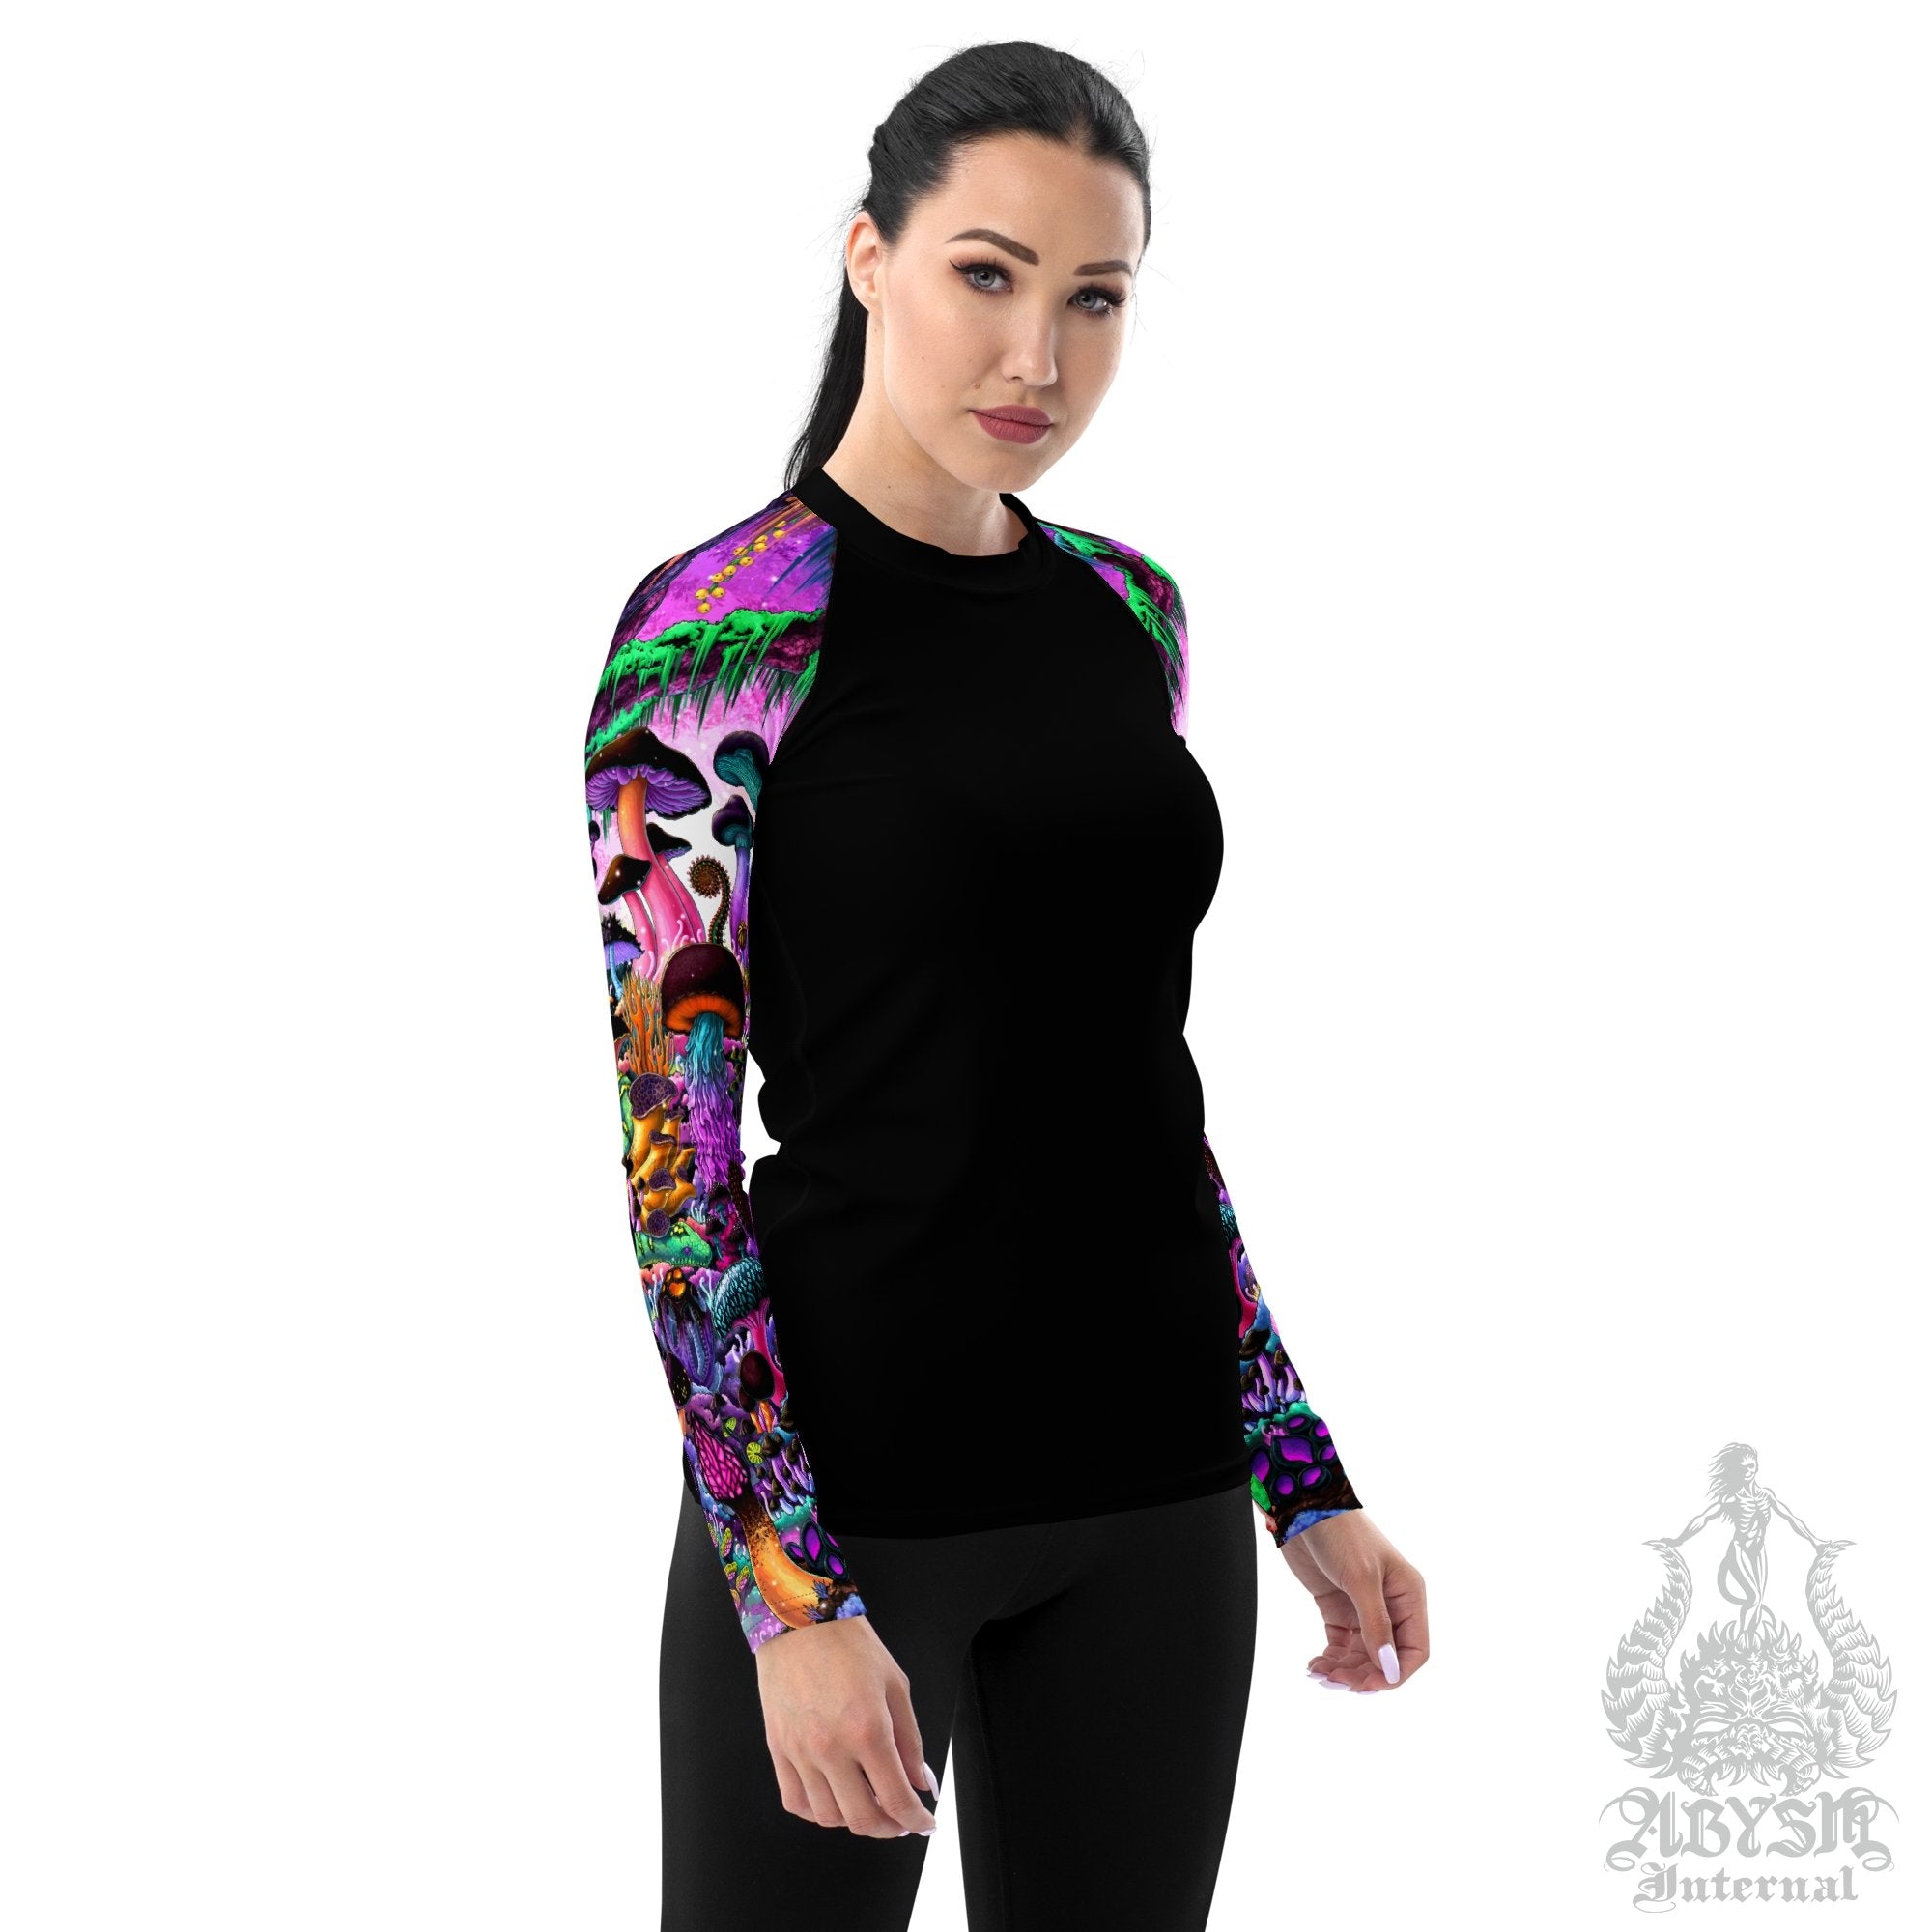 Mushrooms Sleeves Women's Rash Guard, Pastel and Black Long Sleeve spandex shirt for surfing, swimsuit top for water sports, Fantasy Art - Magic Shrooms - Abysm Internal